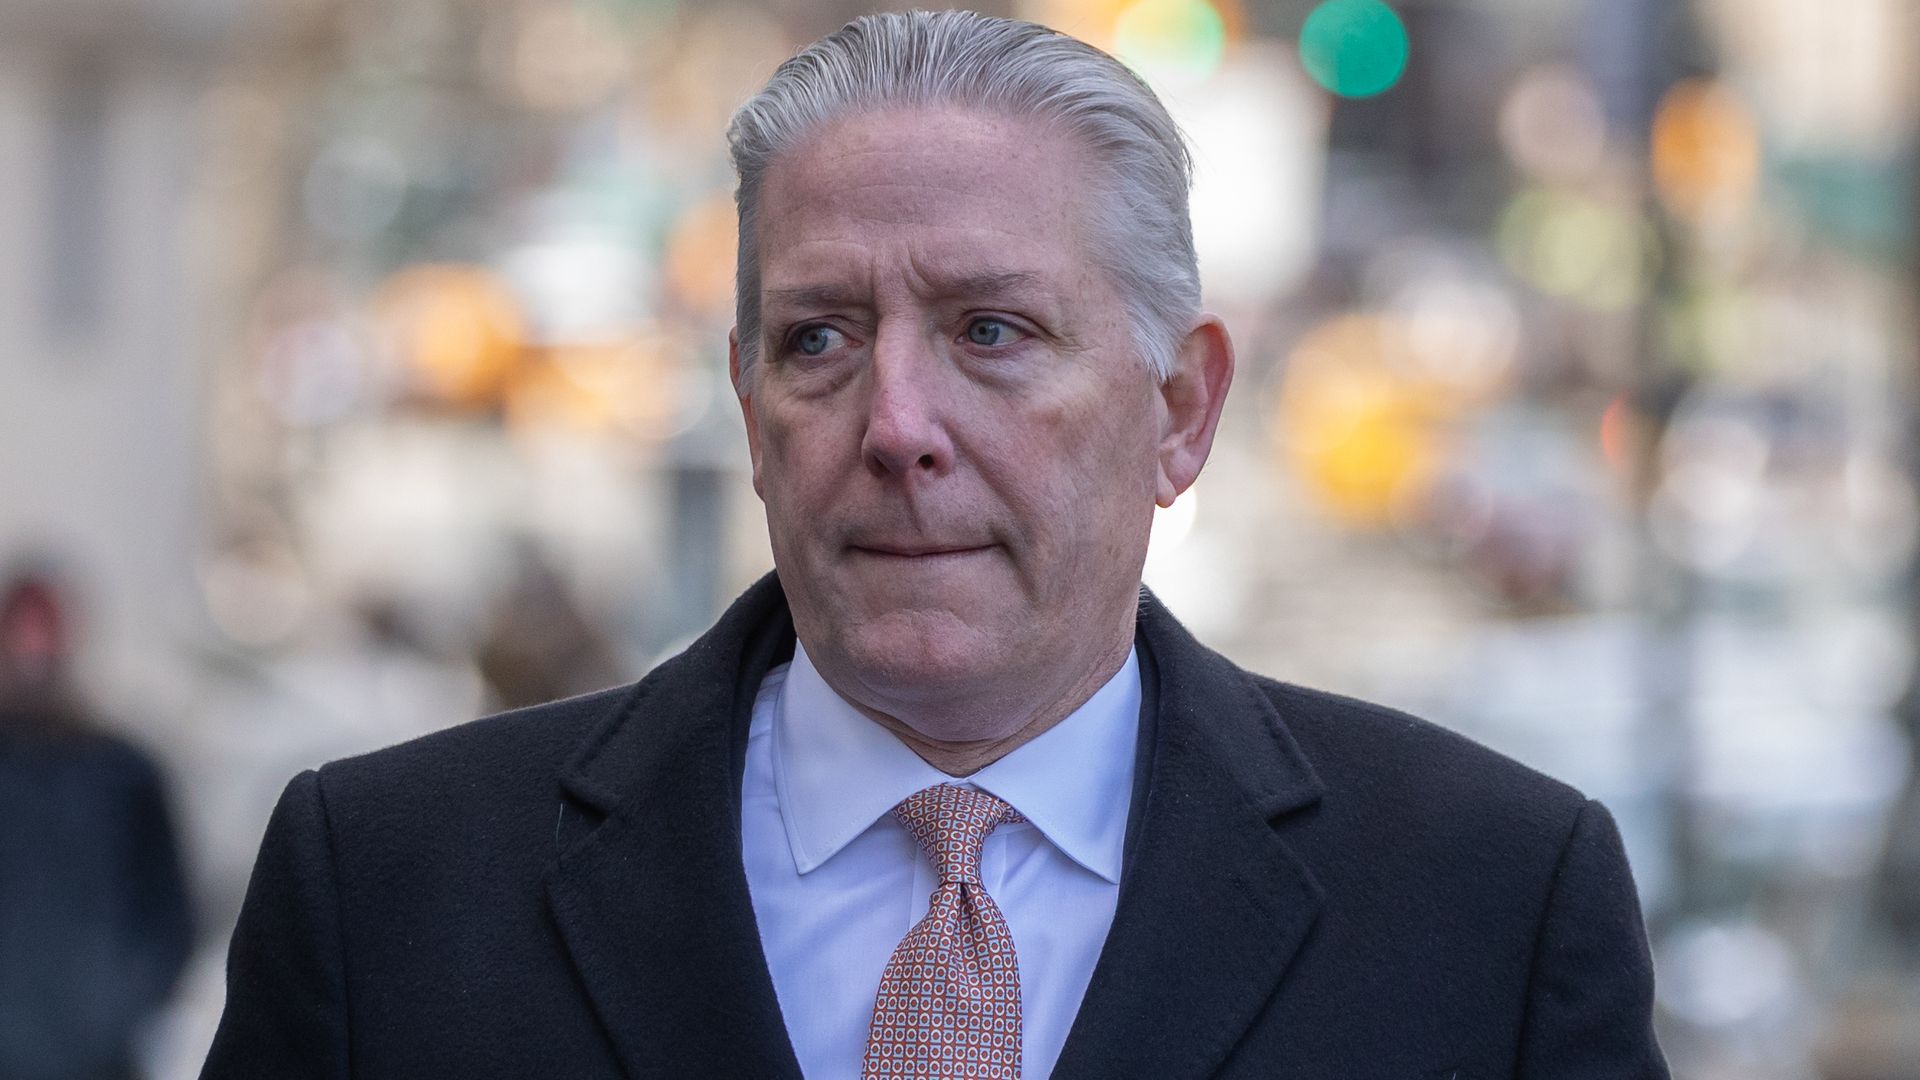 Charles McGonigal, former head of counterintelligence for the FBI New York City field office, arriving at a court house in New York in March 2023.